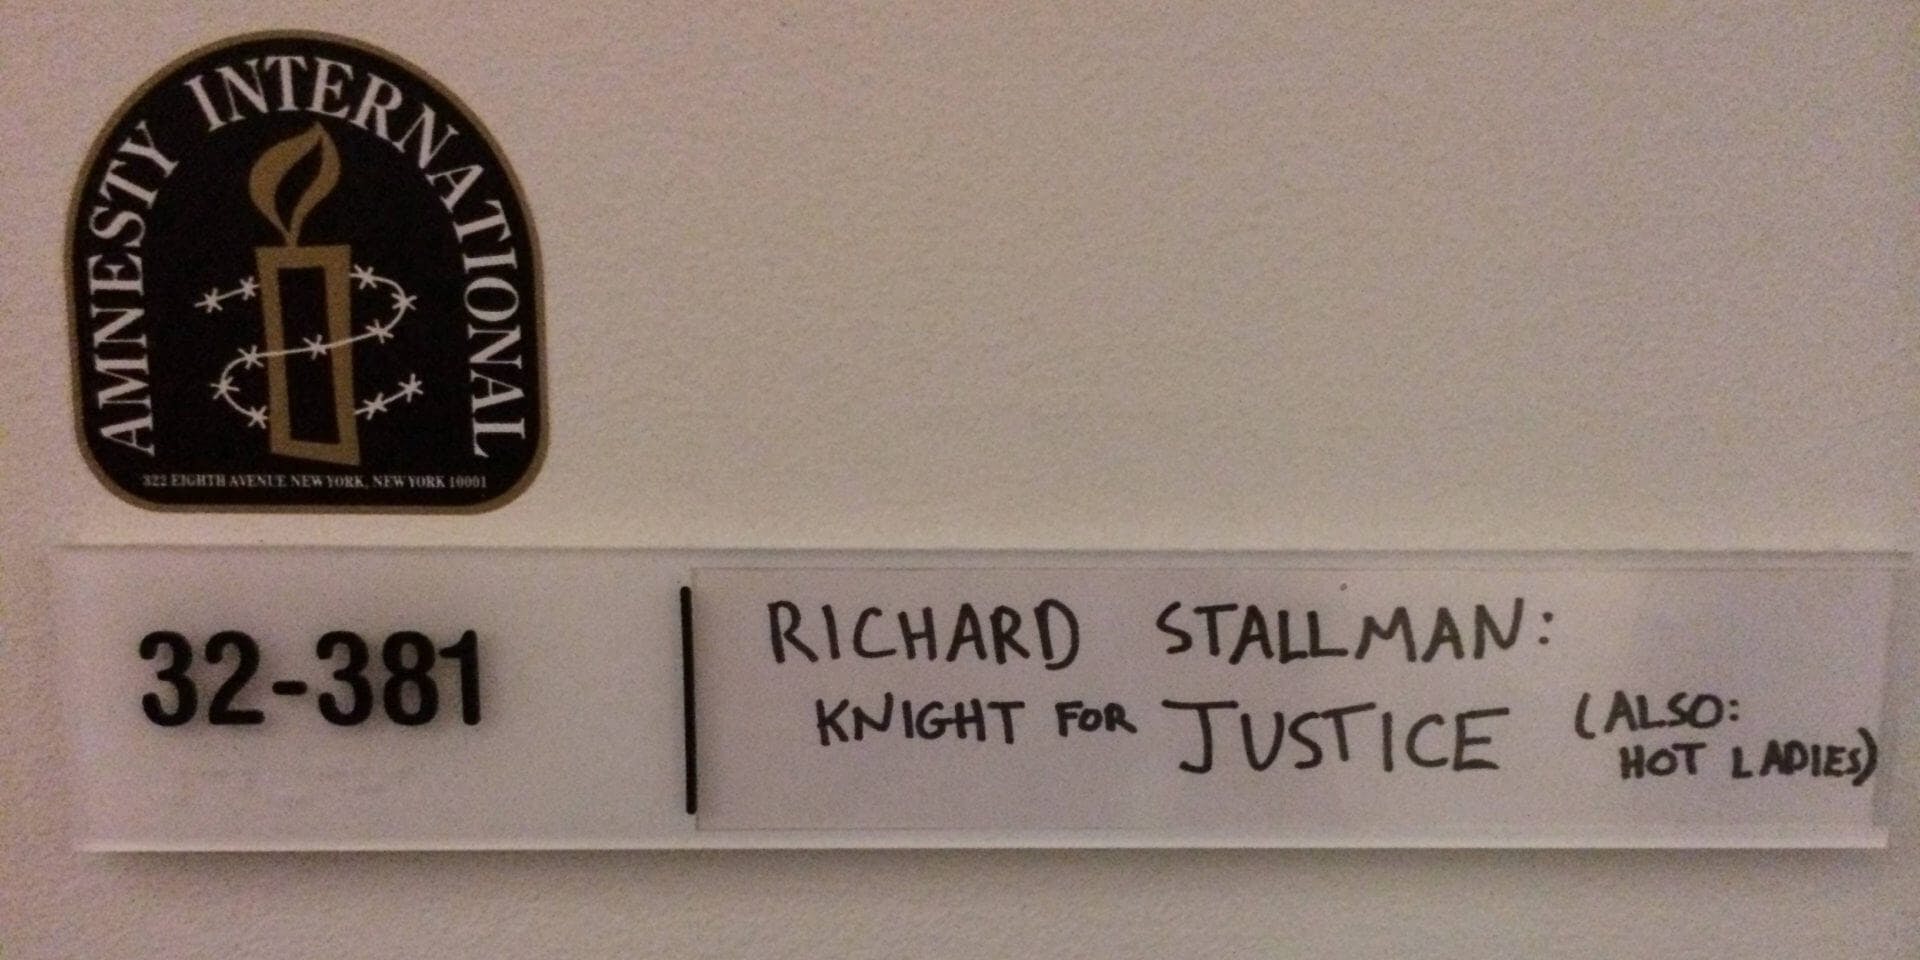 A door sign for Richard Stallman reads 'Knight for justice (also: hot ladies)